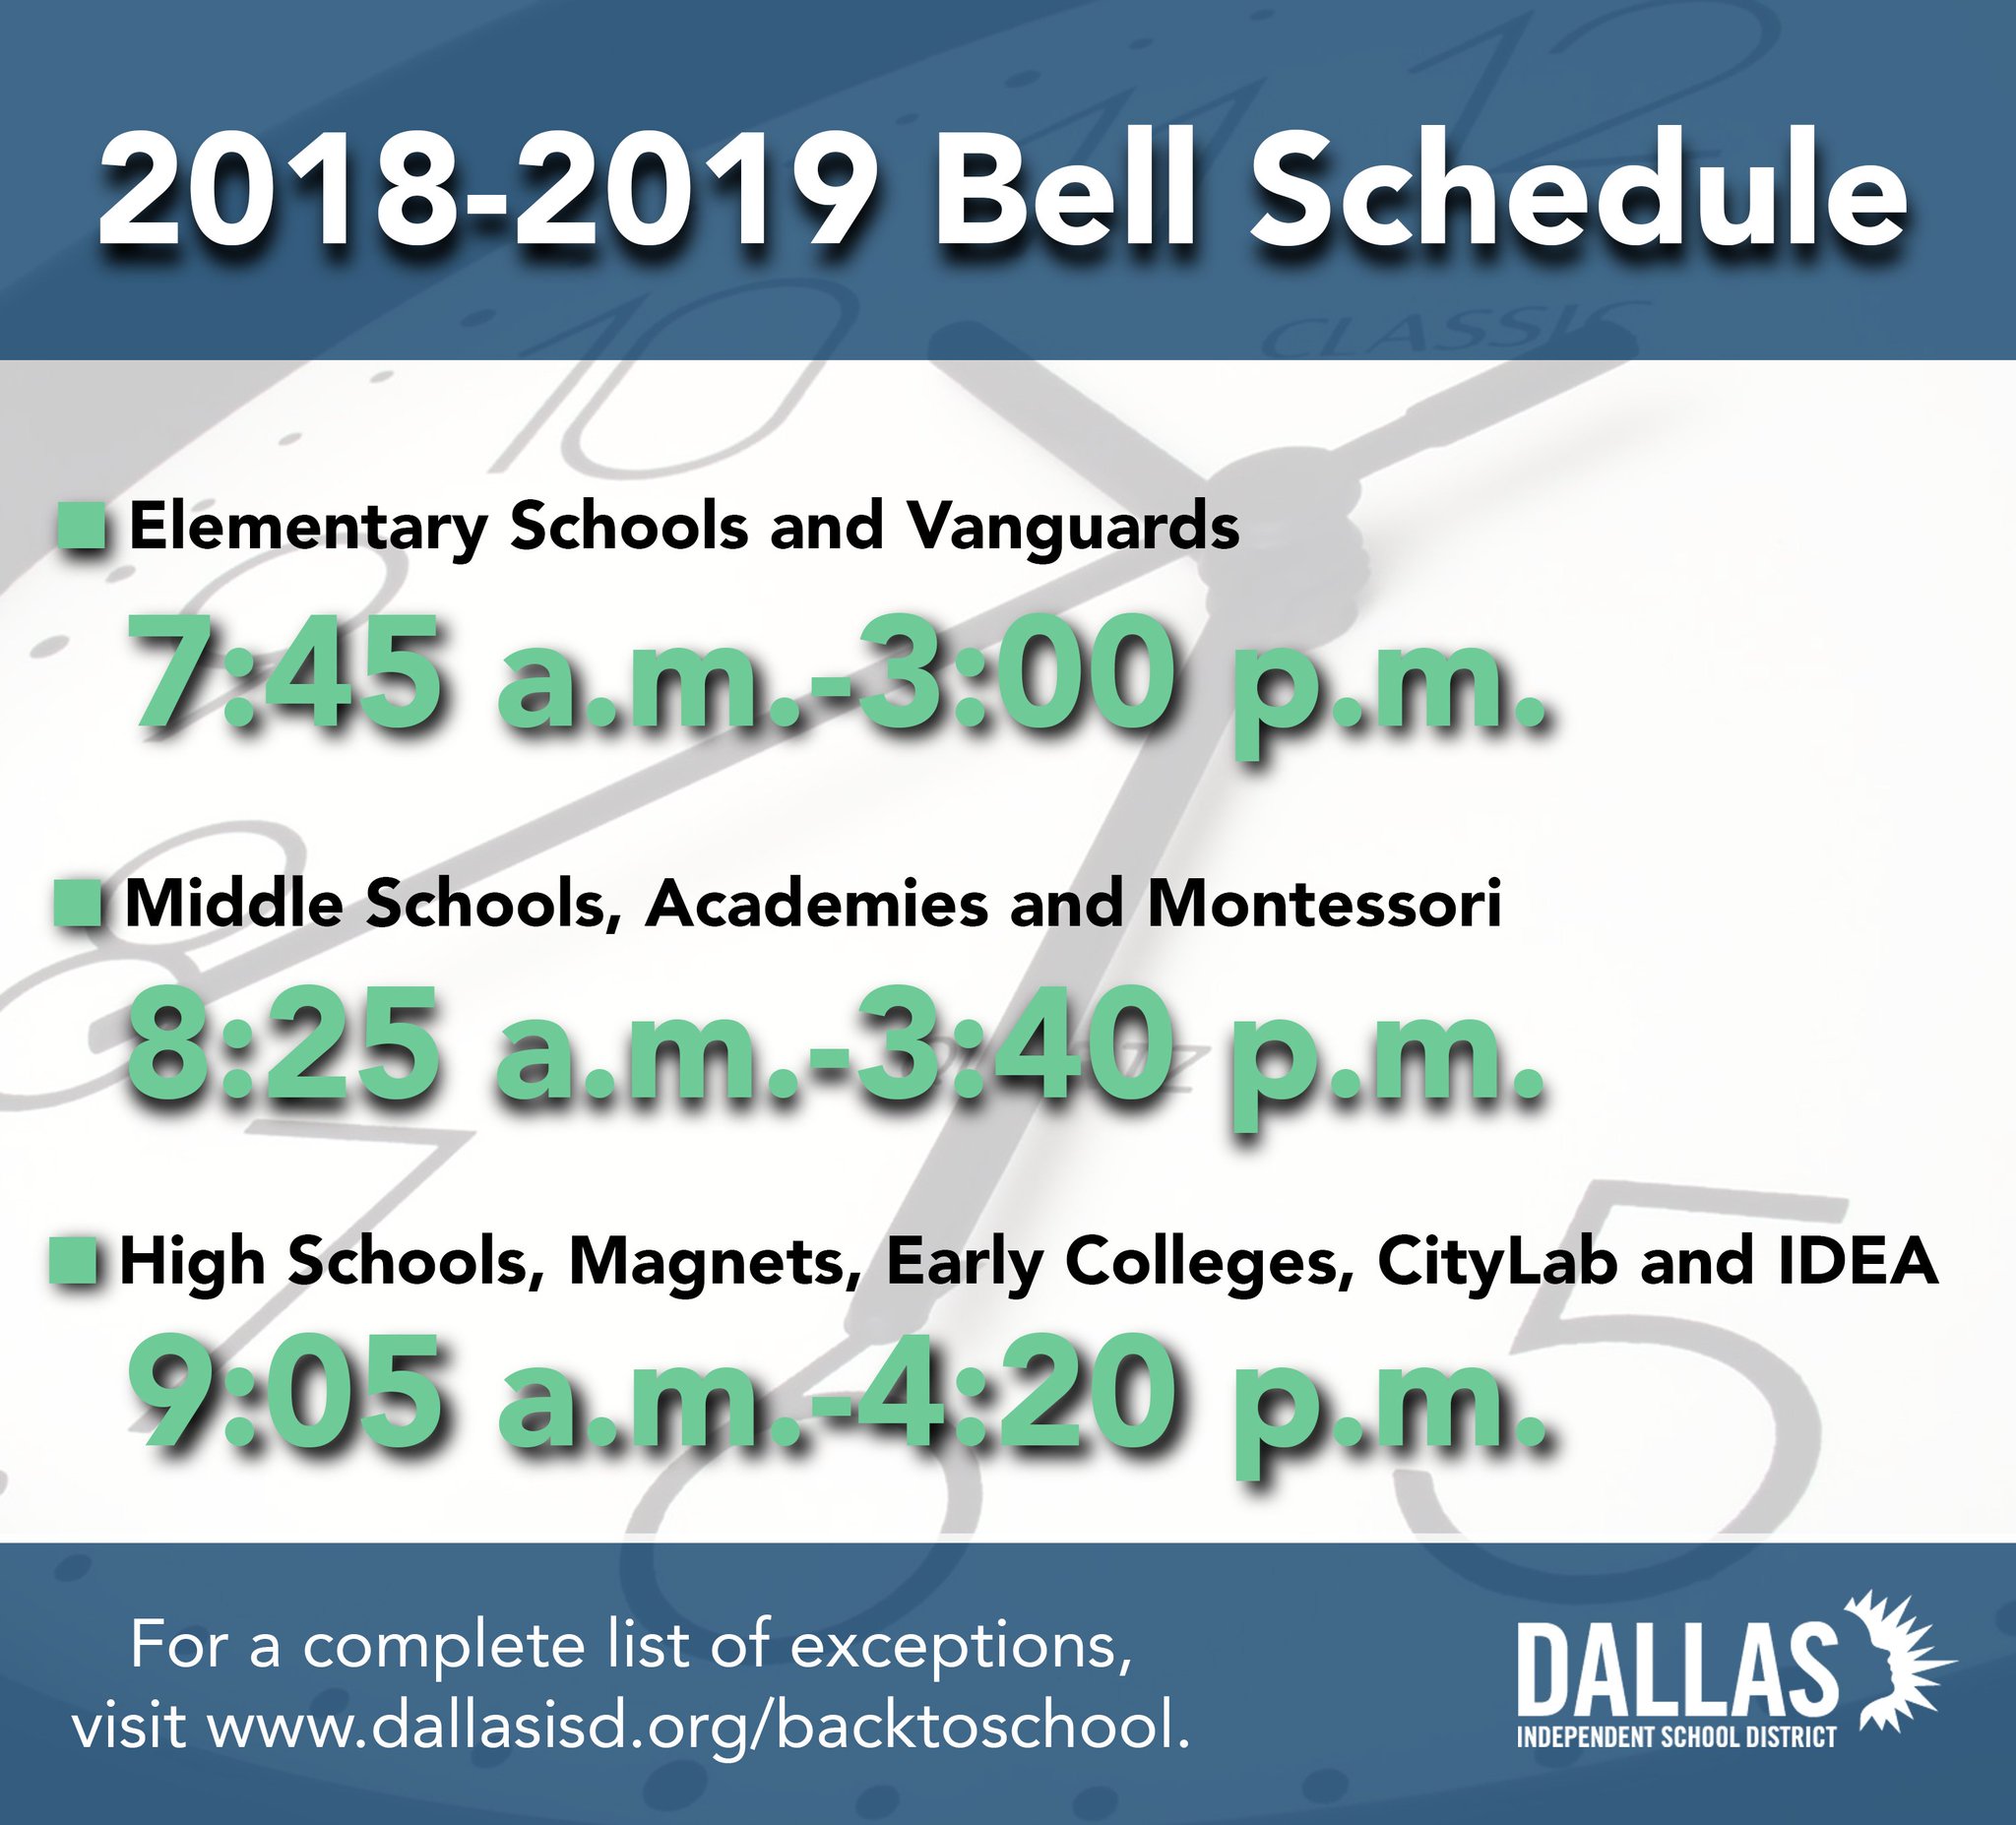 Dallas ISD on Twitter "The first day of school in DallasISD is Monday